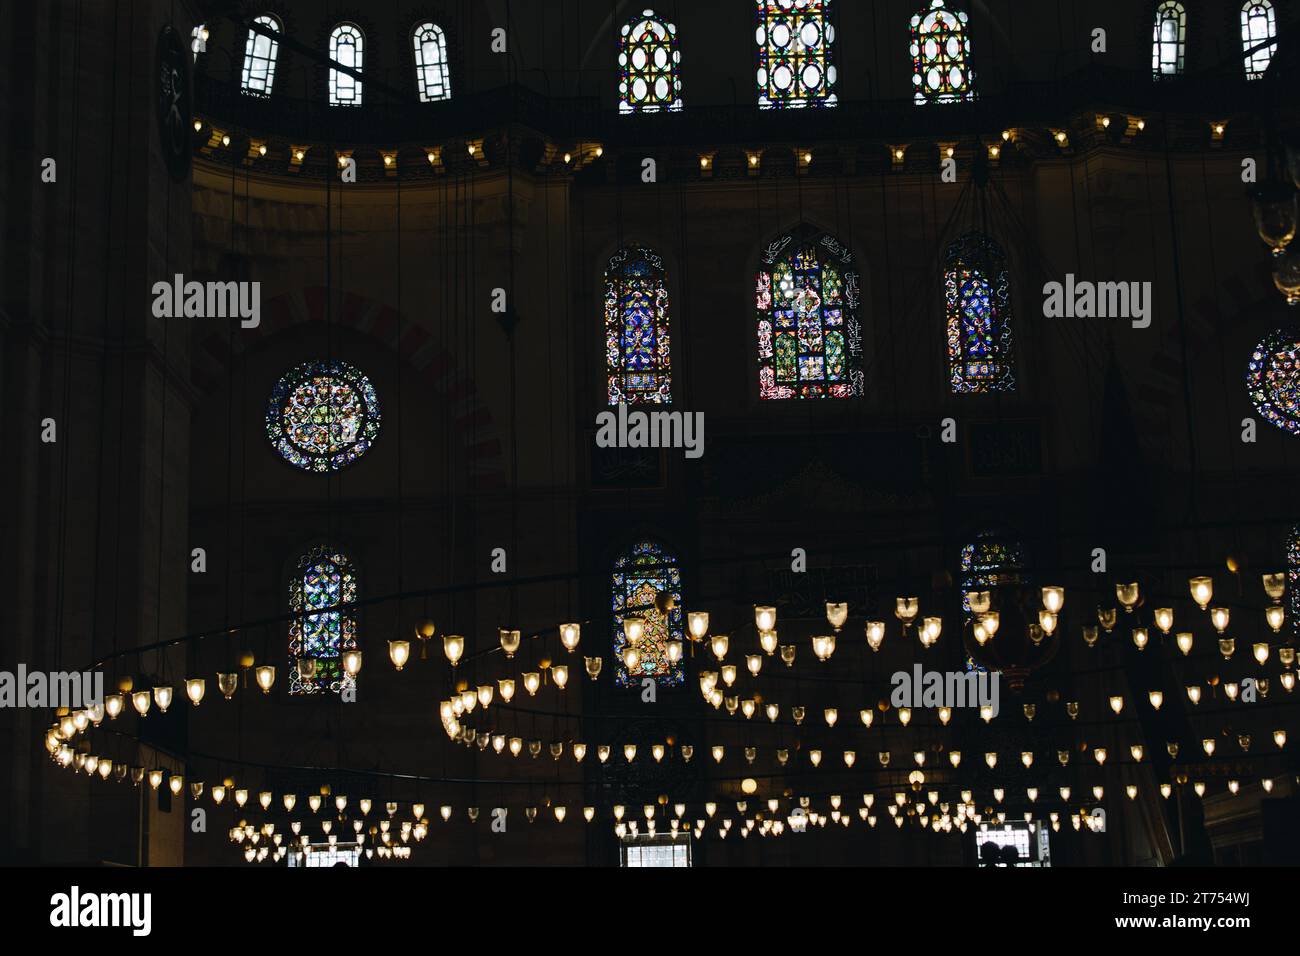 Bright Lamps on circular chandelier in a big mosque Stock Photo